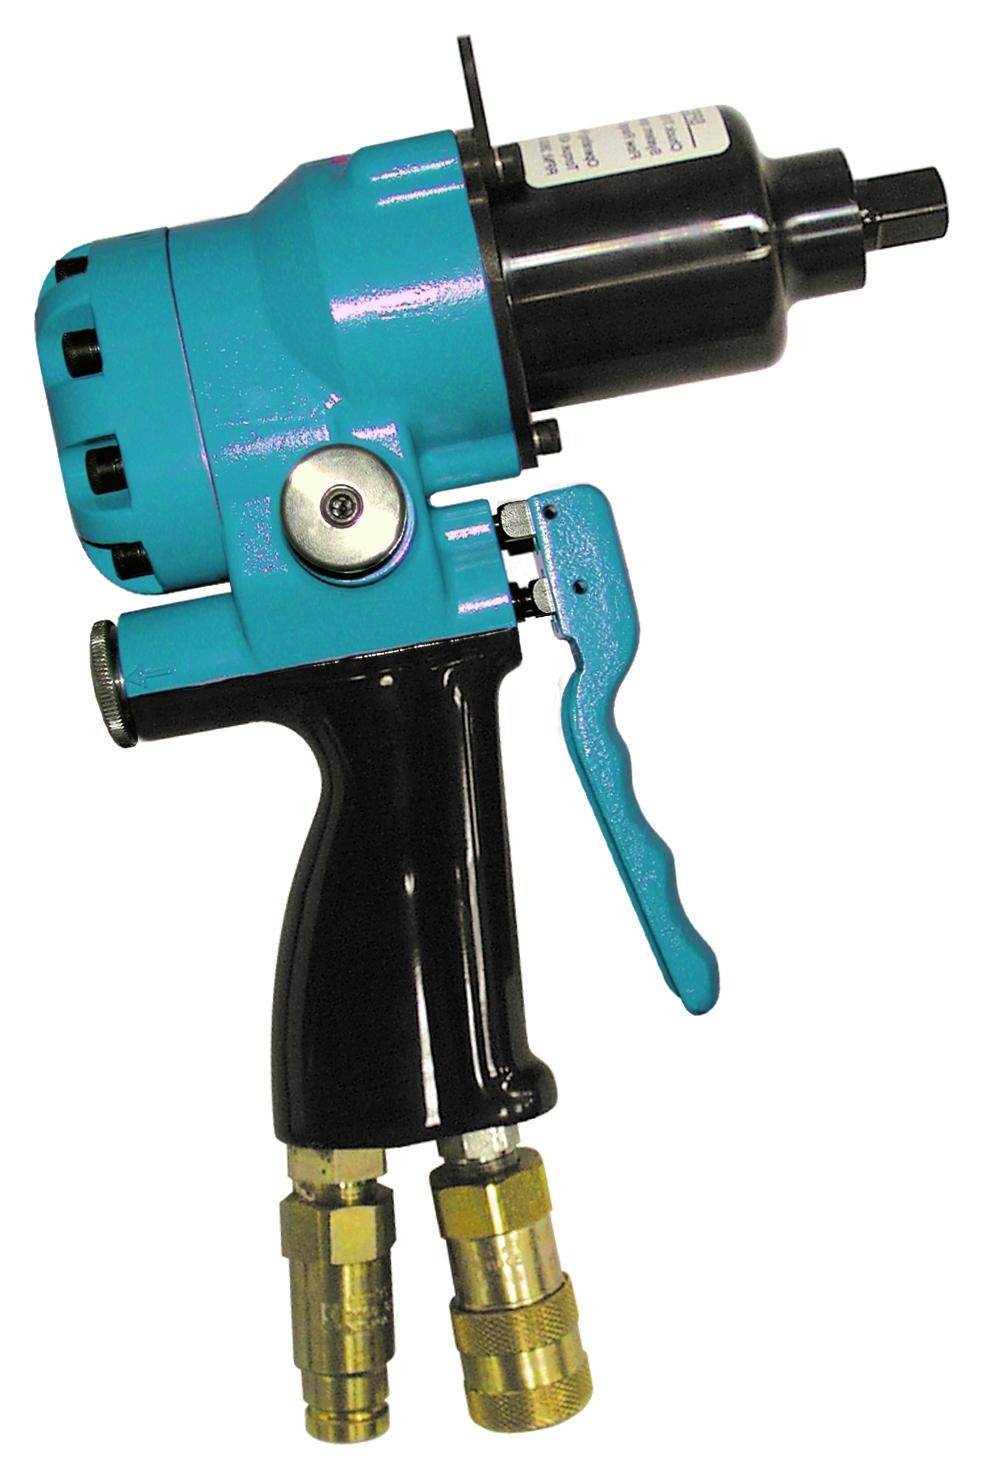 Reliable Equipment REL-425C Underwater Hydraulic 7/16" Hex Drive w/ 1/2" Square Drive Adapter (Includes Hose Whips & Couplers)